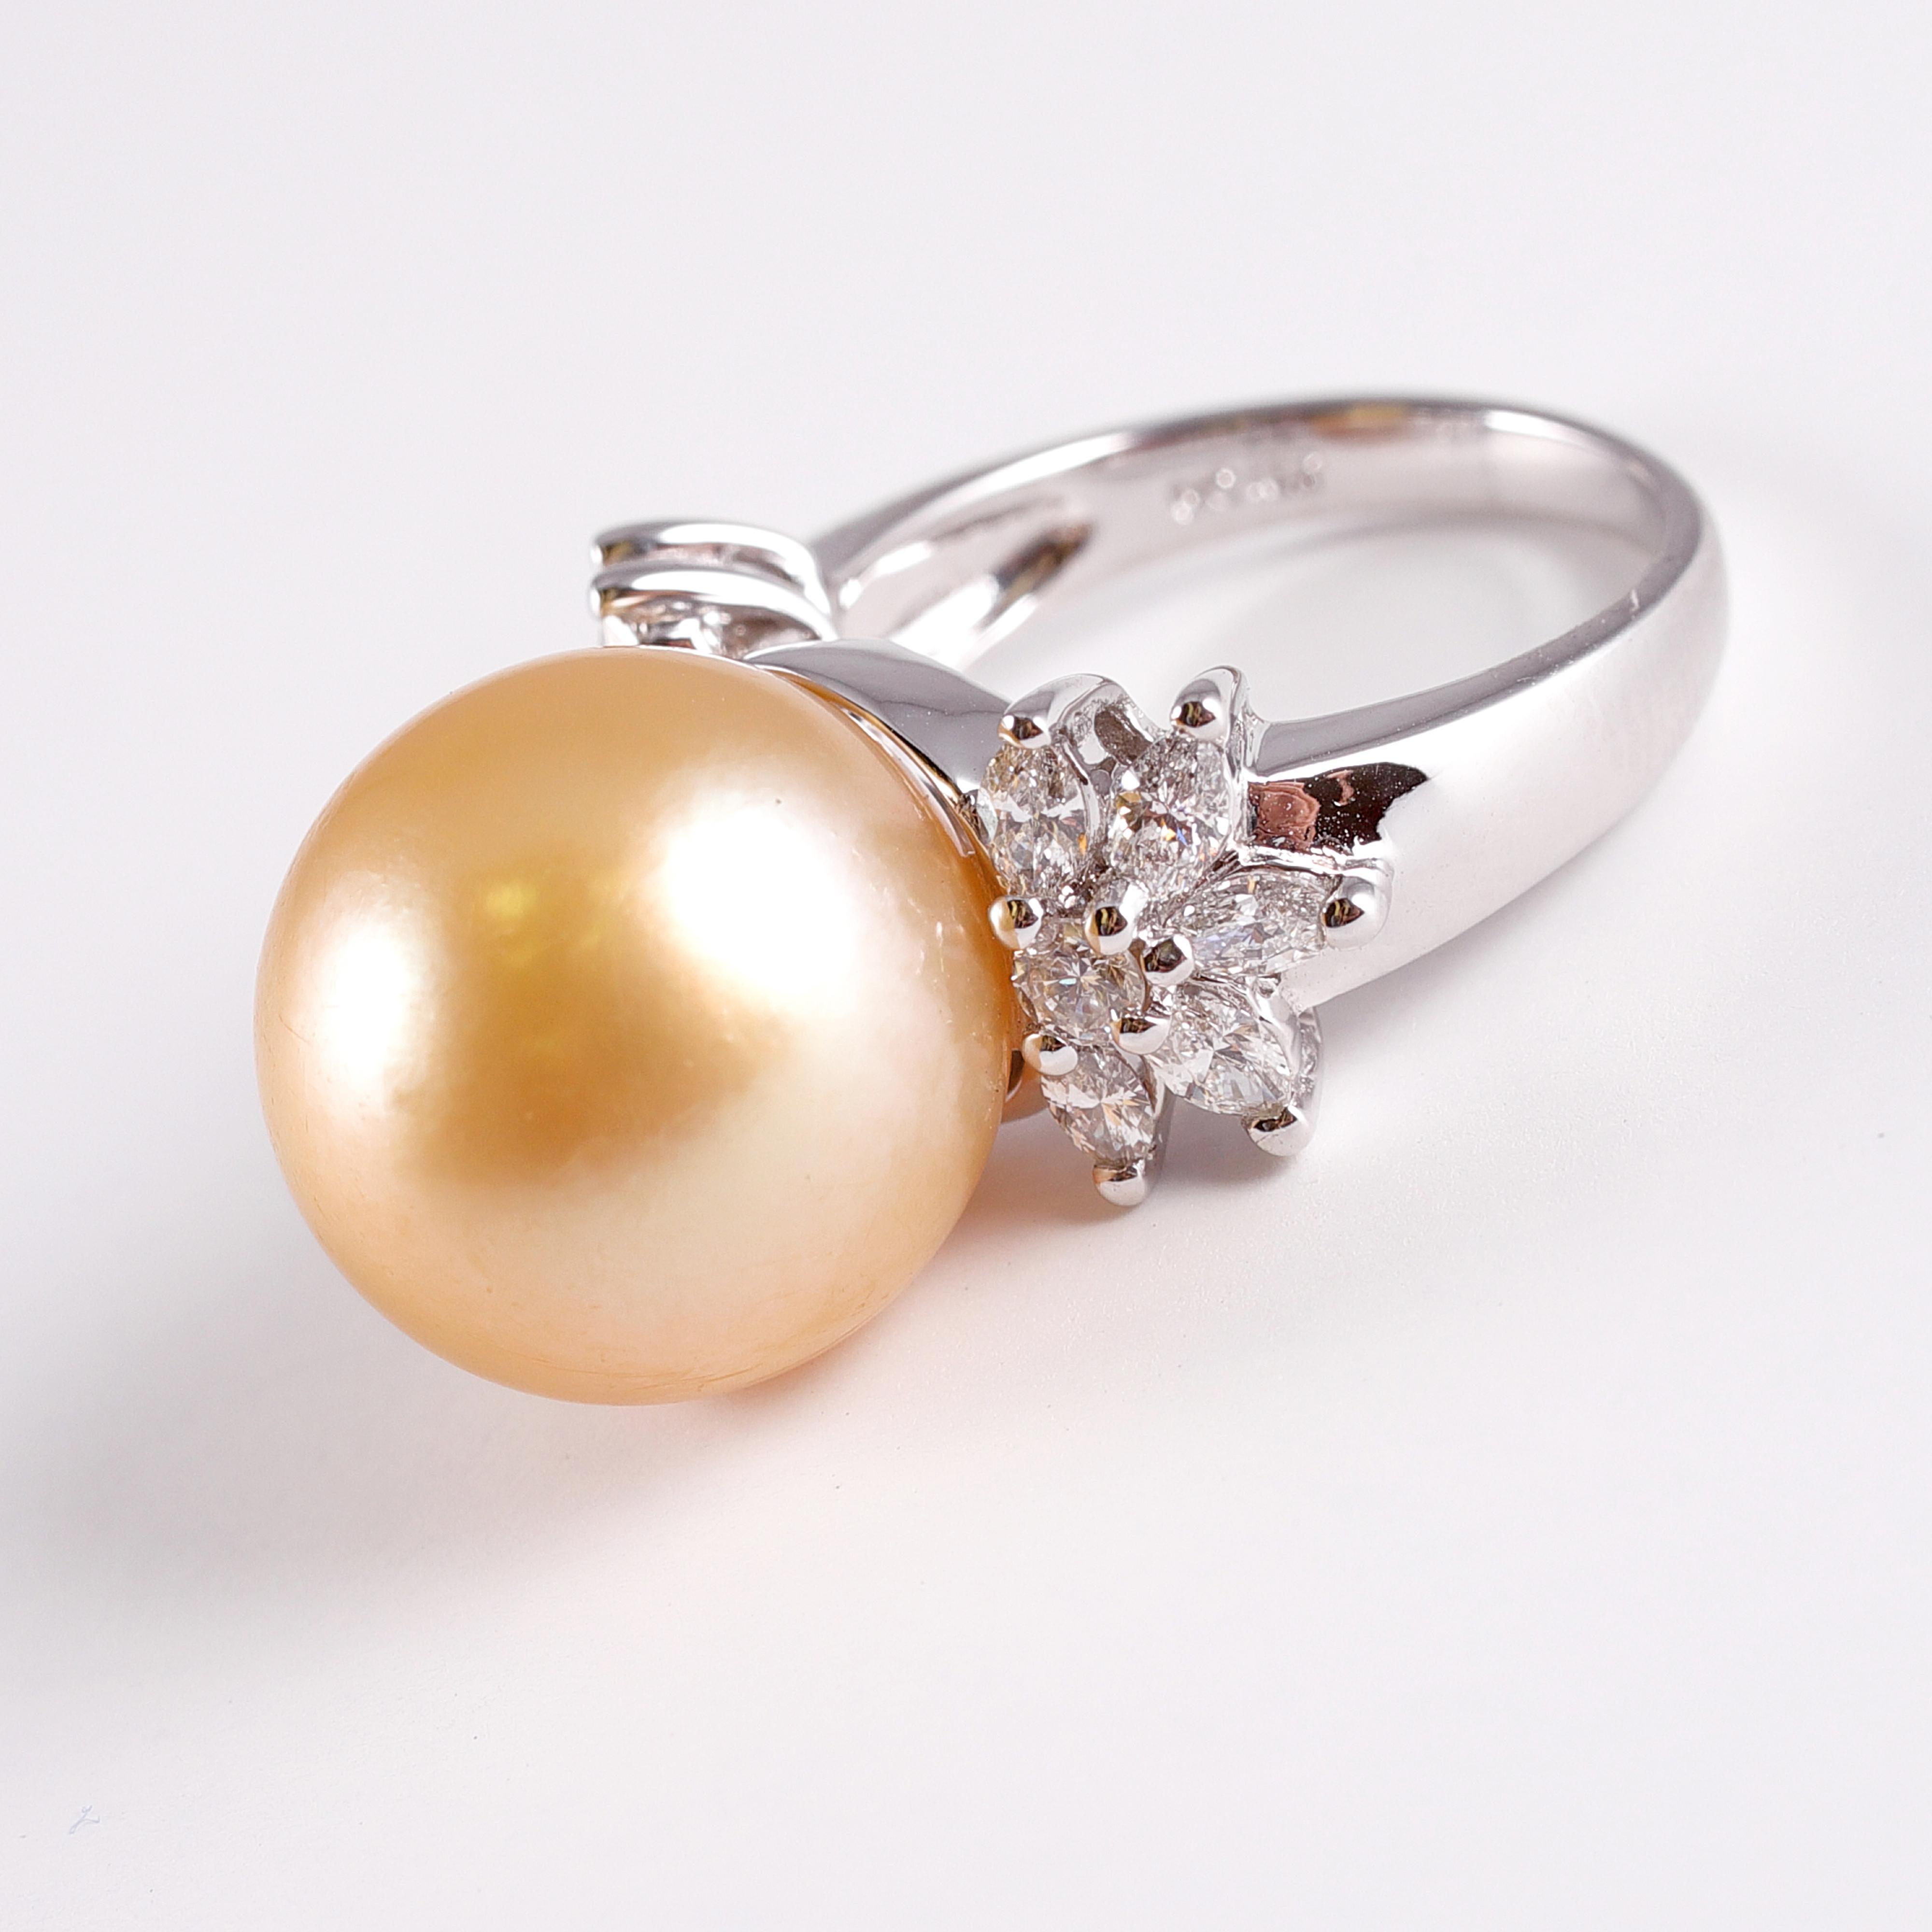 Golden South Sea Pearl measuring 14.68 millimeters accented by .87 carats of round and marquis diamonds.  This elegant ring is 18 karat white gold and is a size 6 1/2.